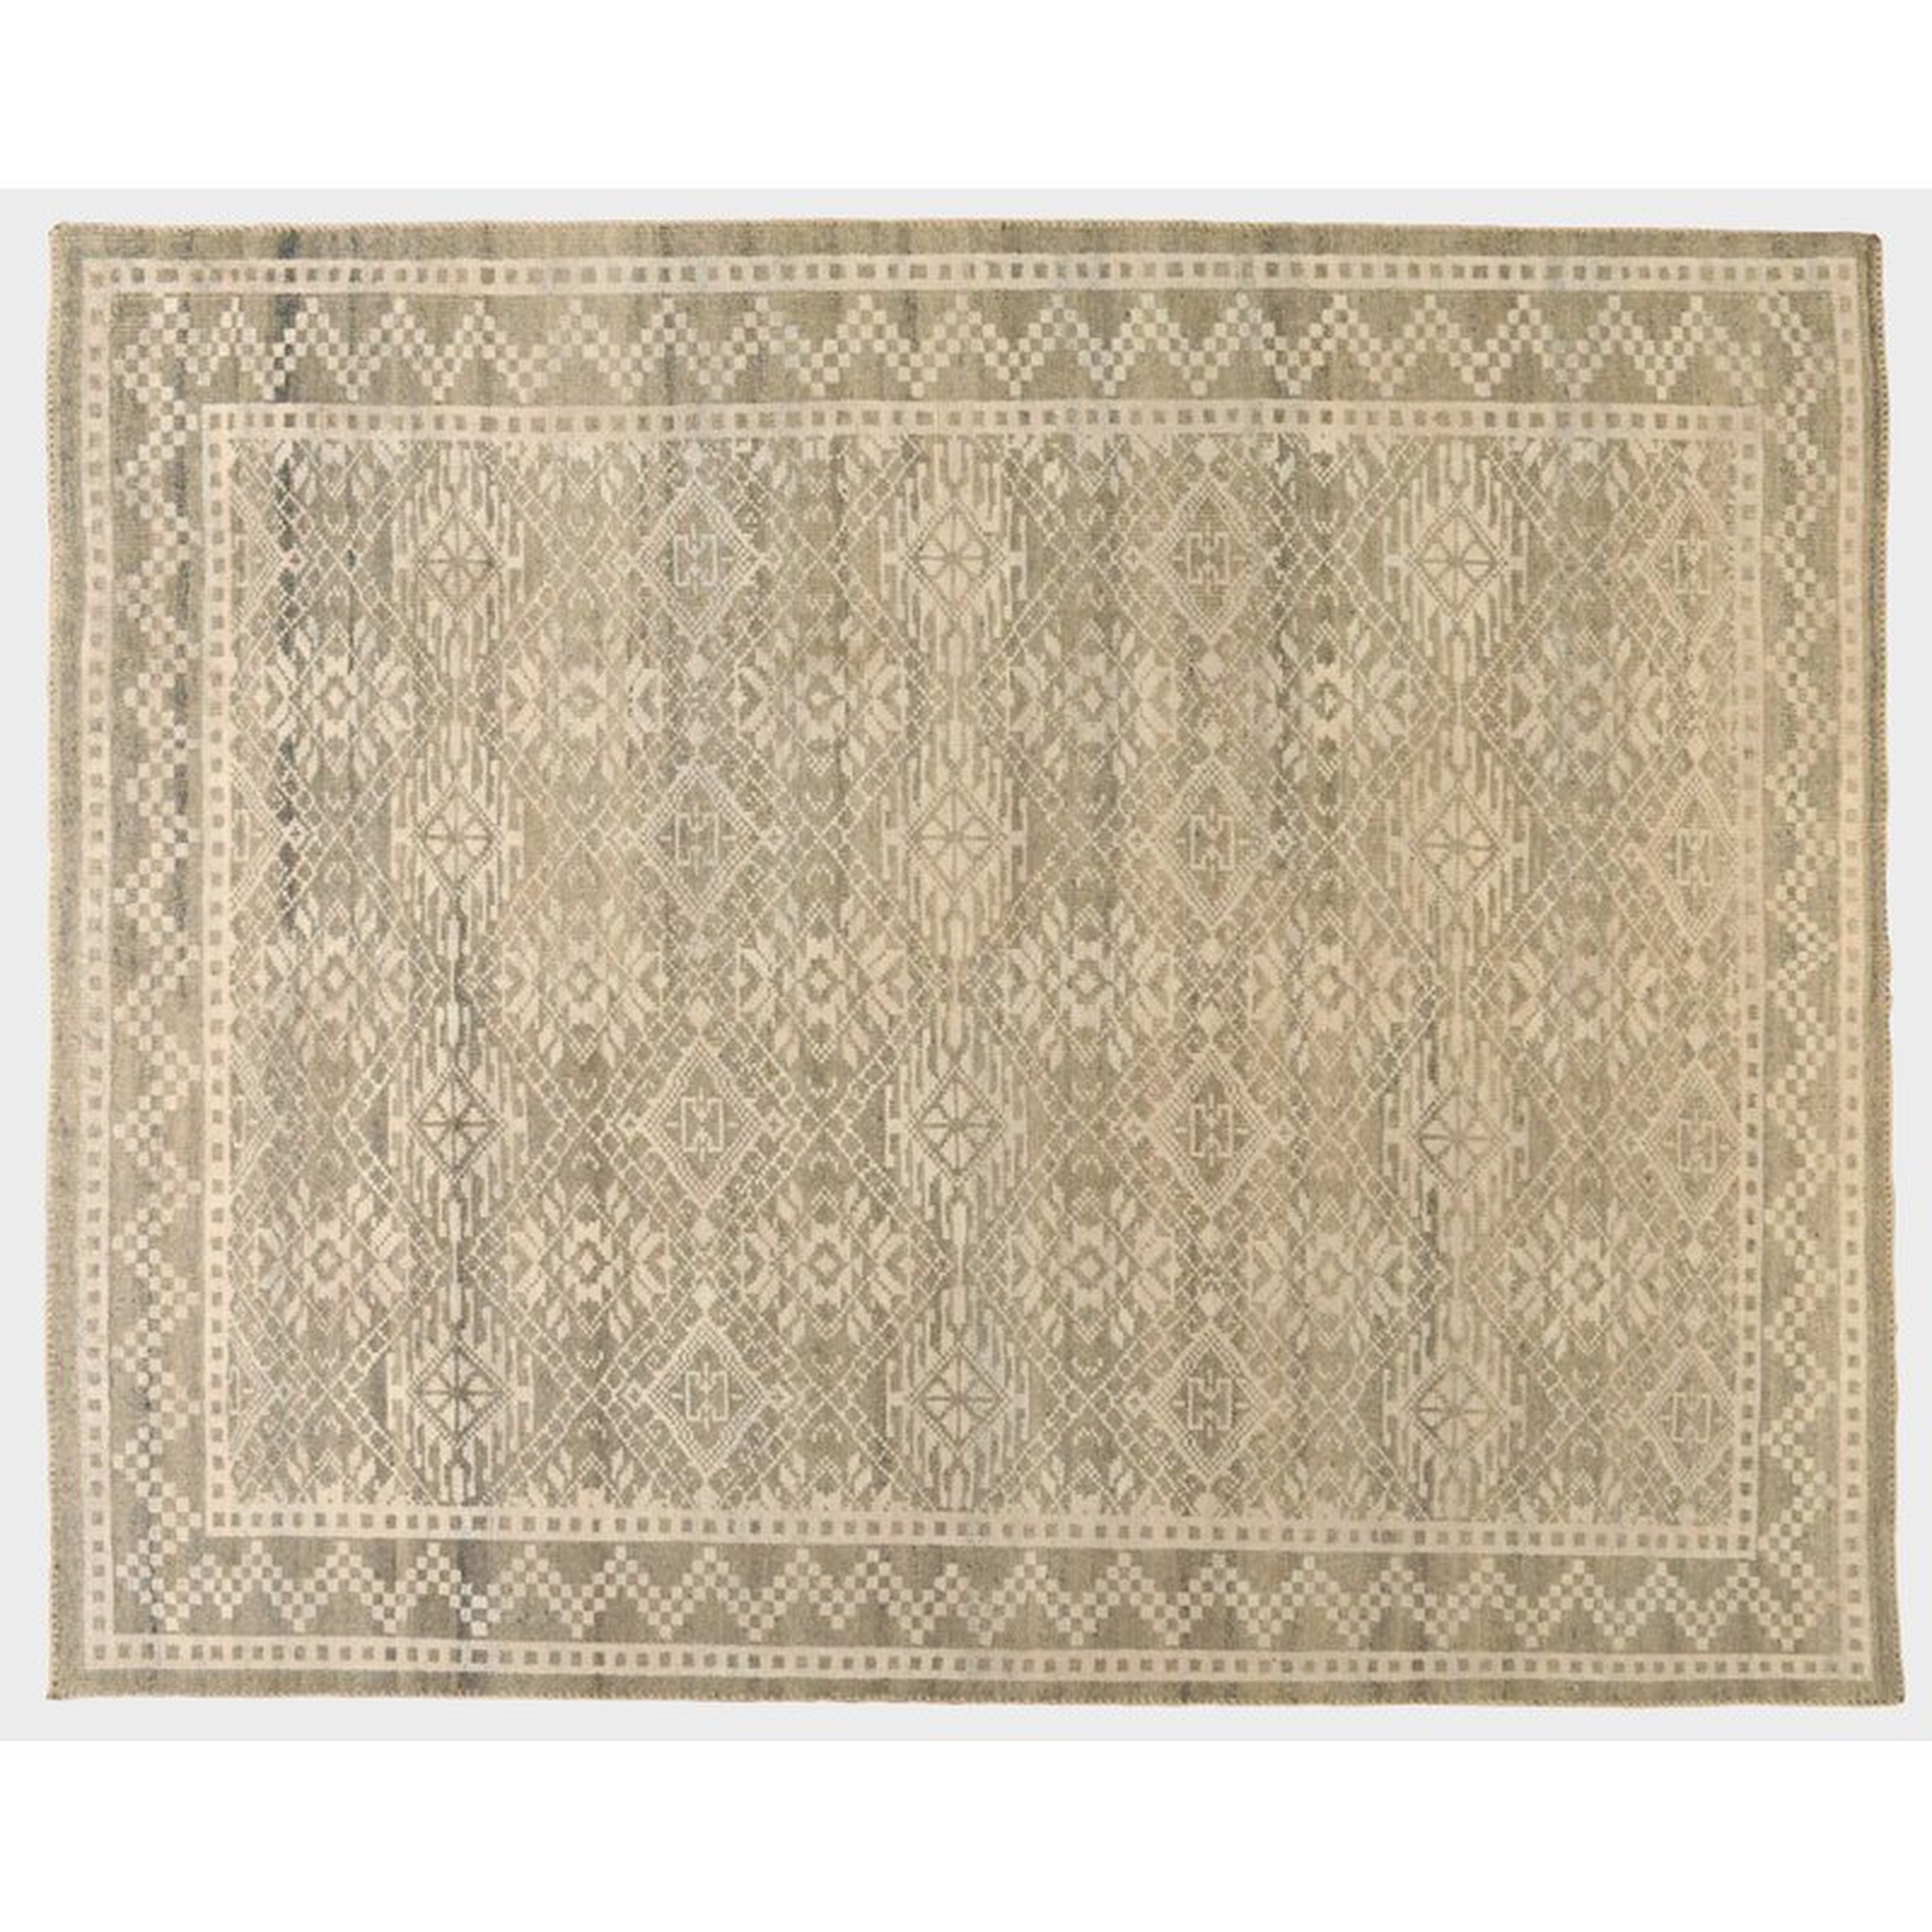 Aga John Oriental Rugs One-of-a-Kind Indian Hand-Knotted Ivory/Brown 8' x 10' Area Rug - Perigold